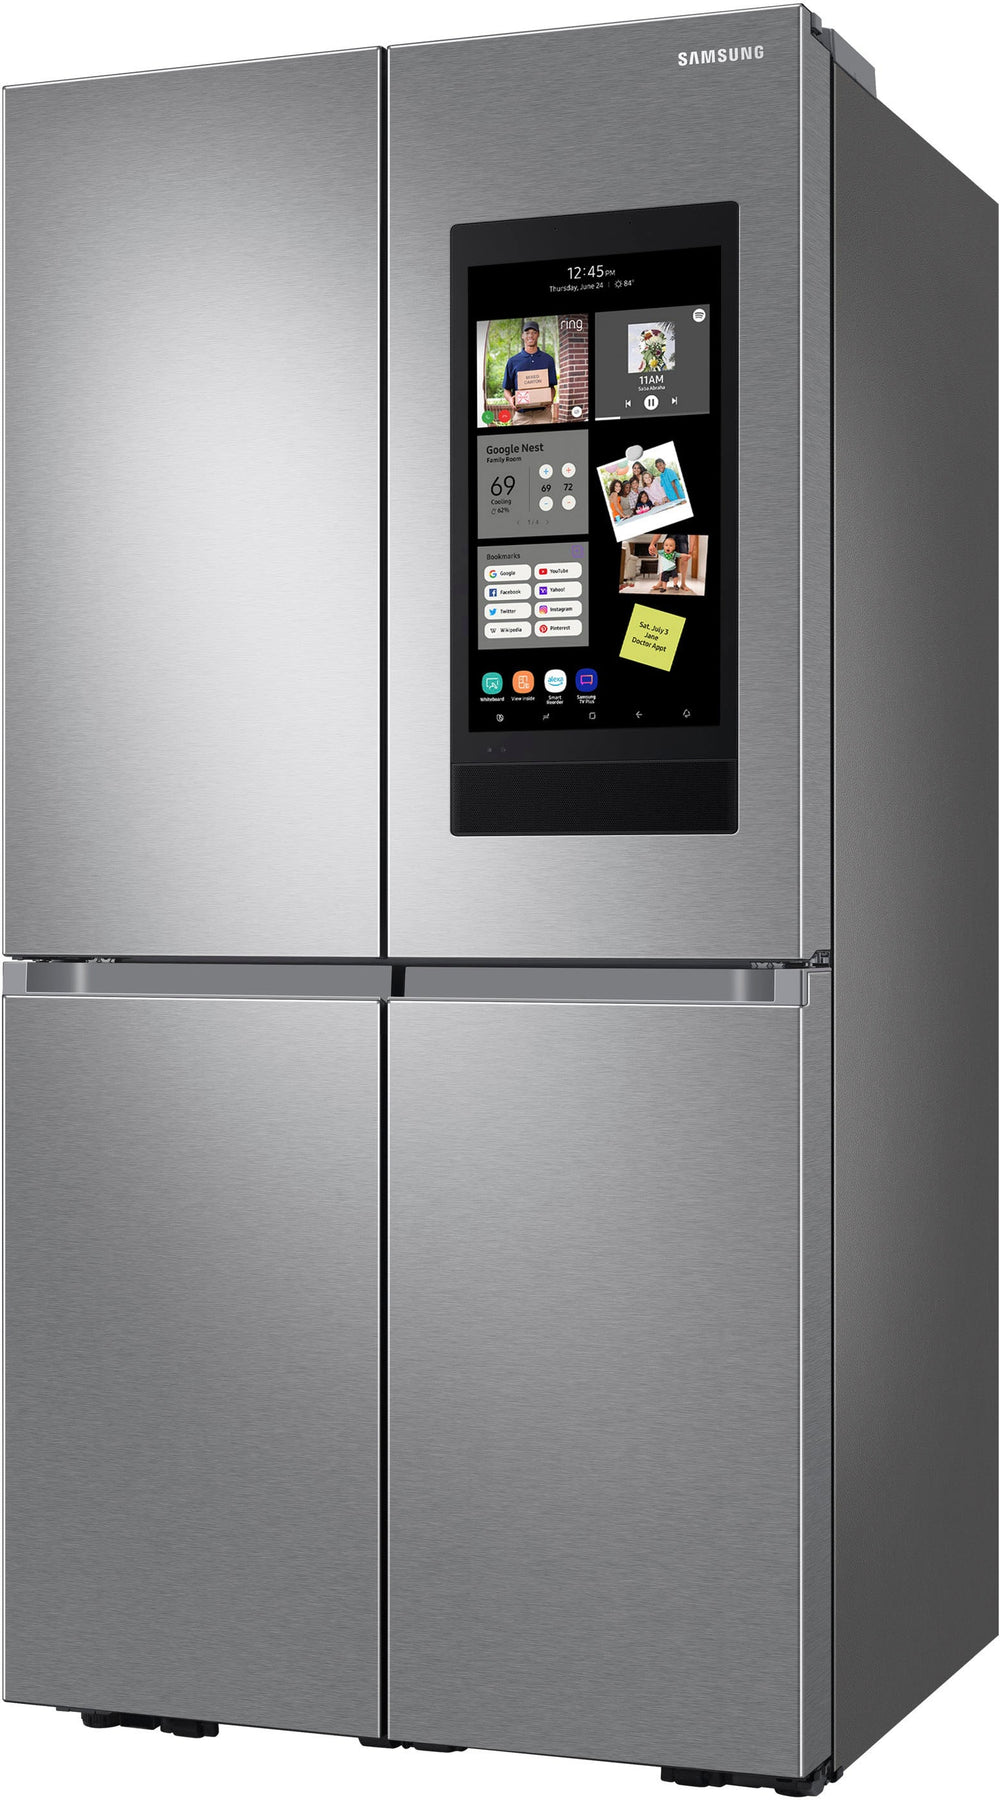 Samsung - 29 cu. ft. Smart 4-Door Flex™ refrigerator with Family Hub™ and Beverage Center - Stainless steel_1